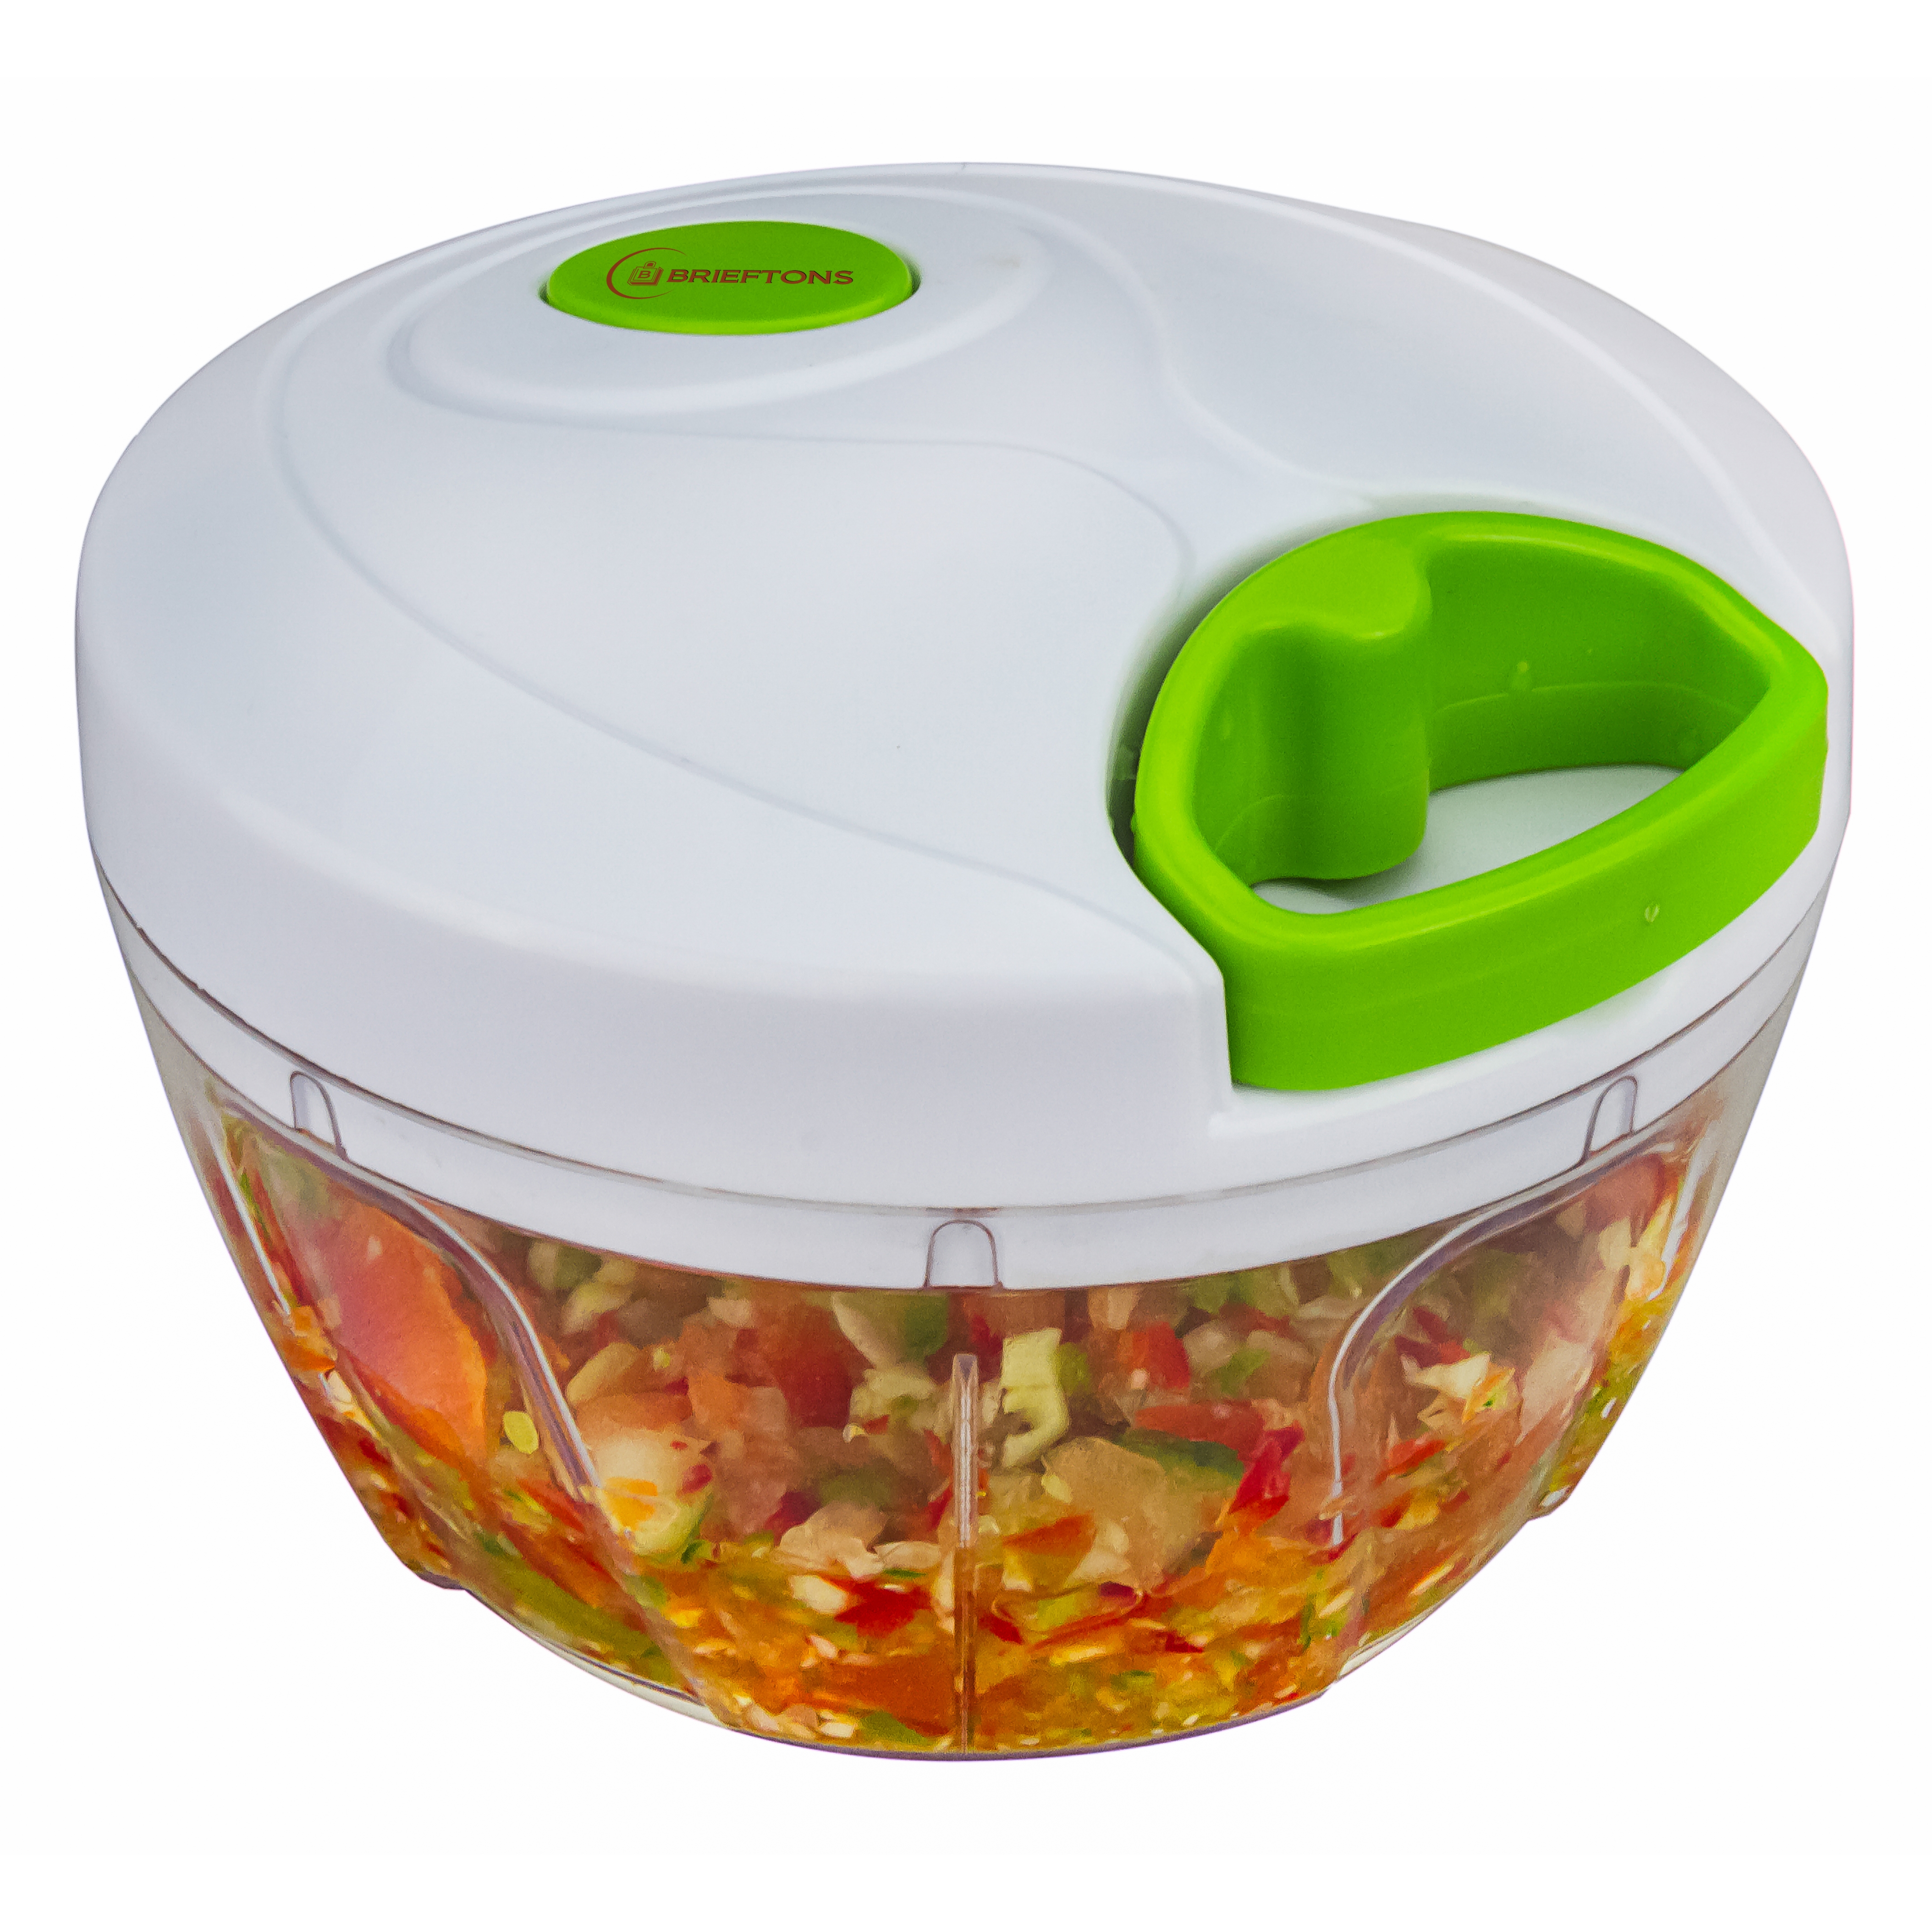 How to Use the Brieftons QuickPush Salad Spinner 